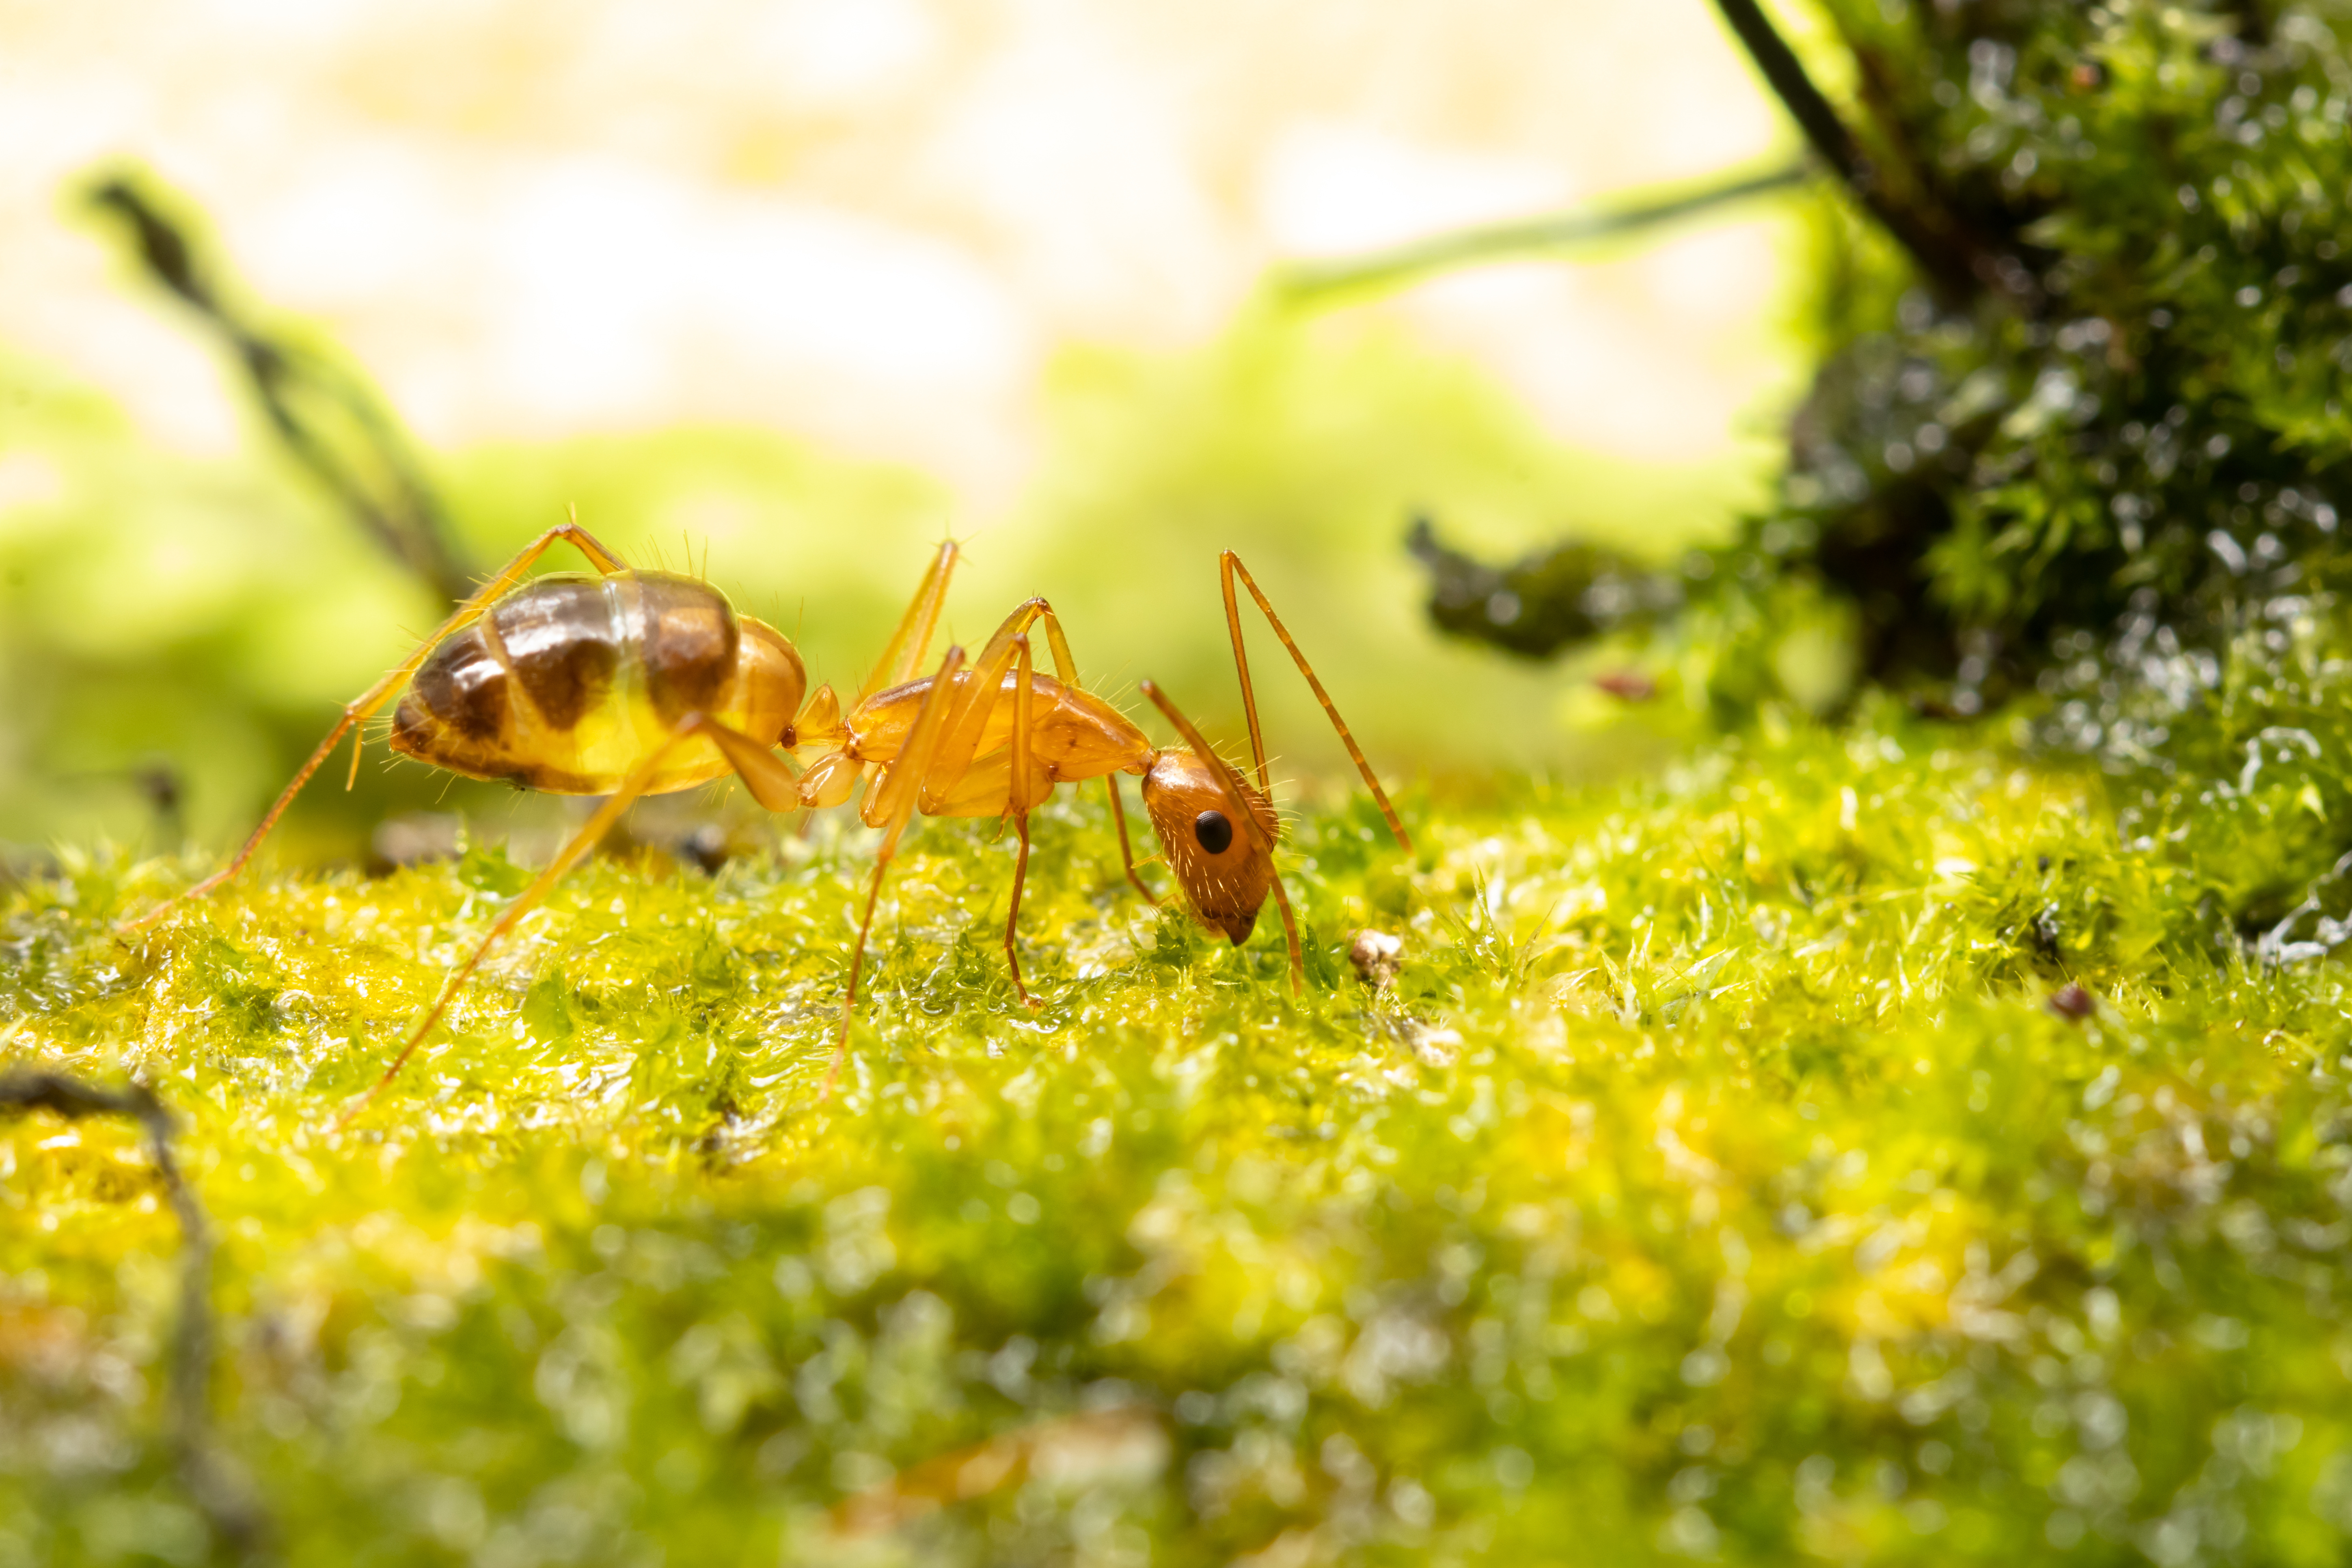 A closeup image of a crazy ant - GGA Pest Management offers extermination services for crazy ants in Waco, TX.